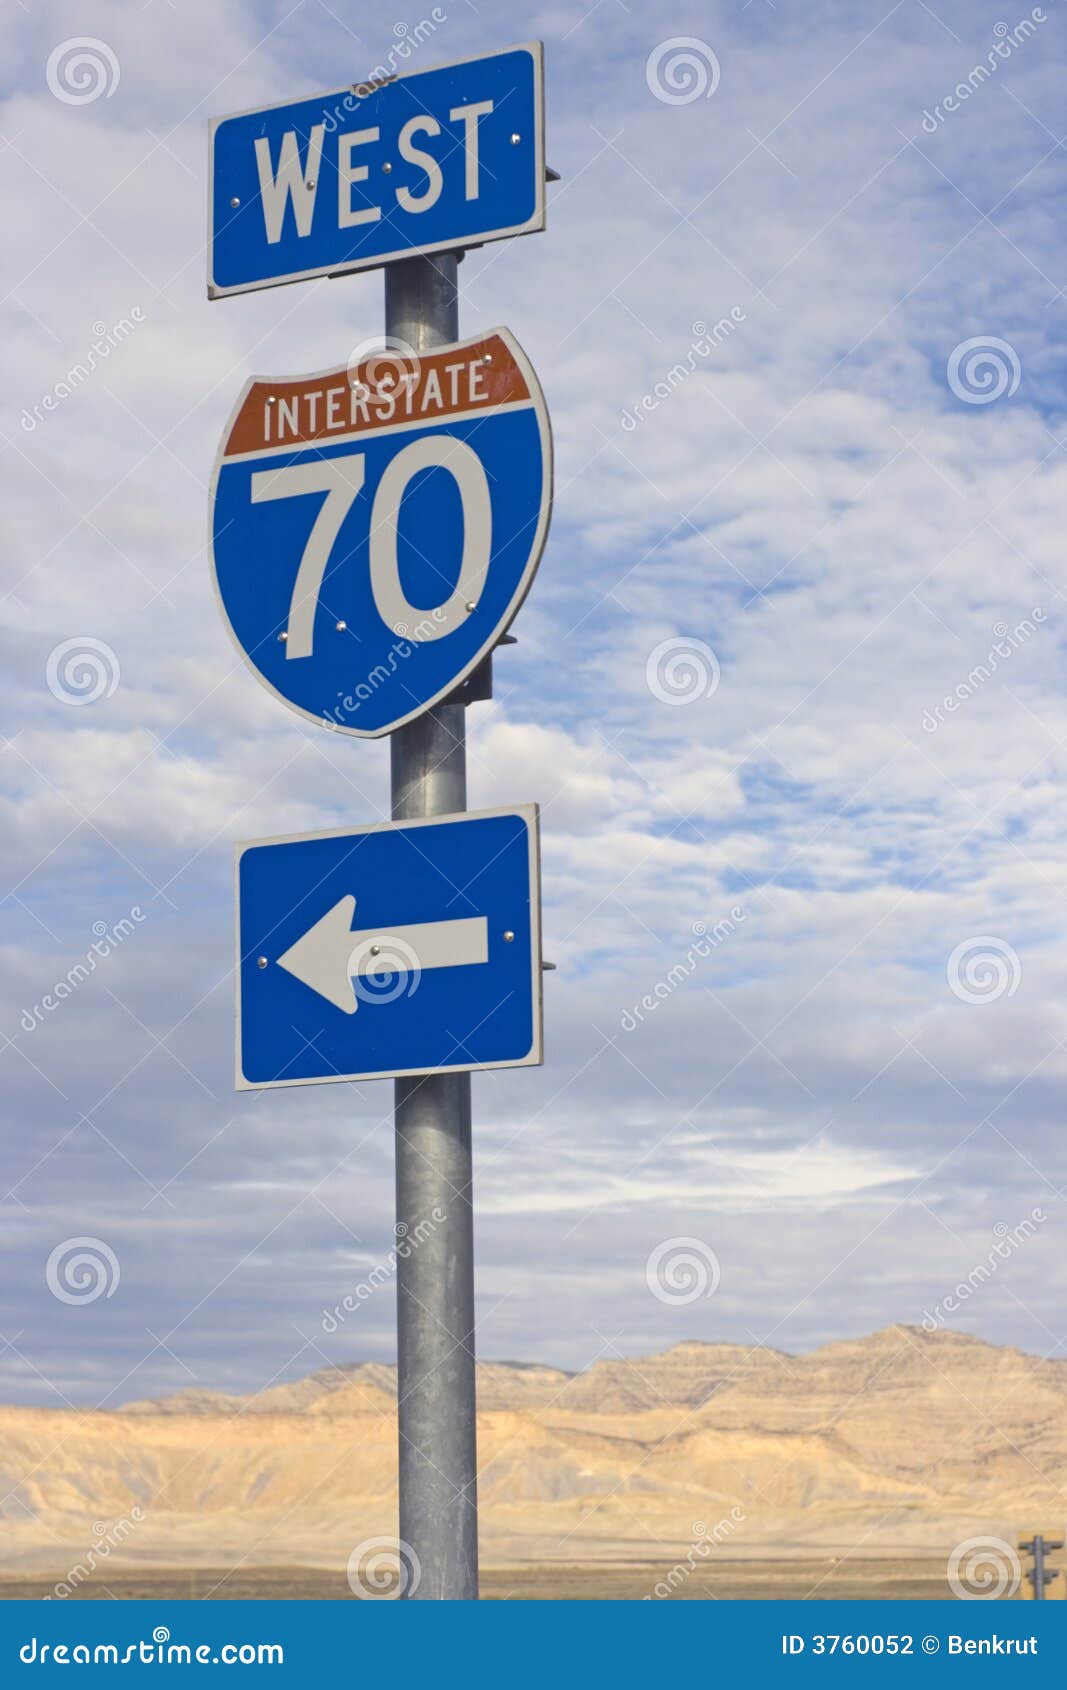 sign of interstate 70